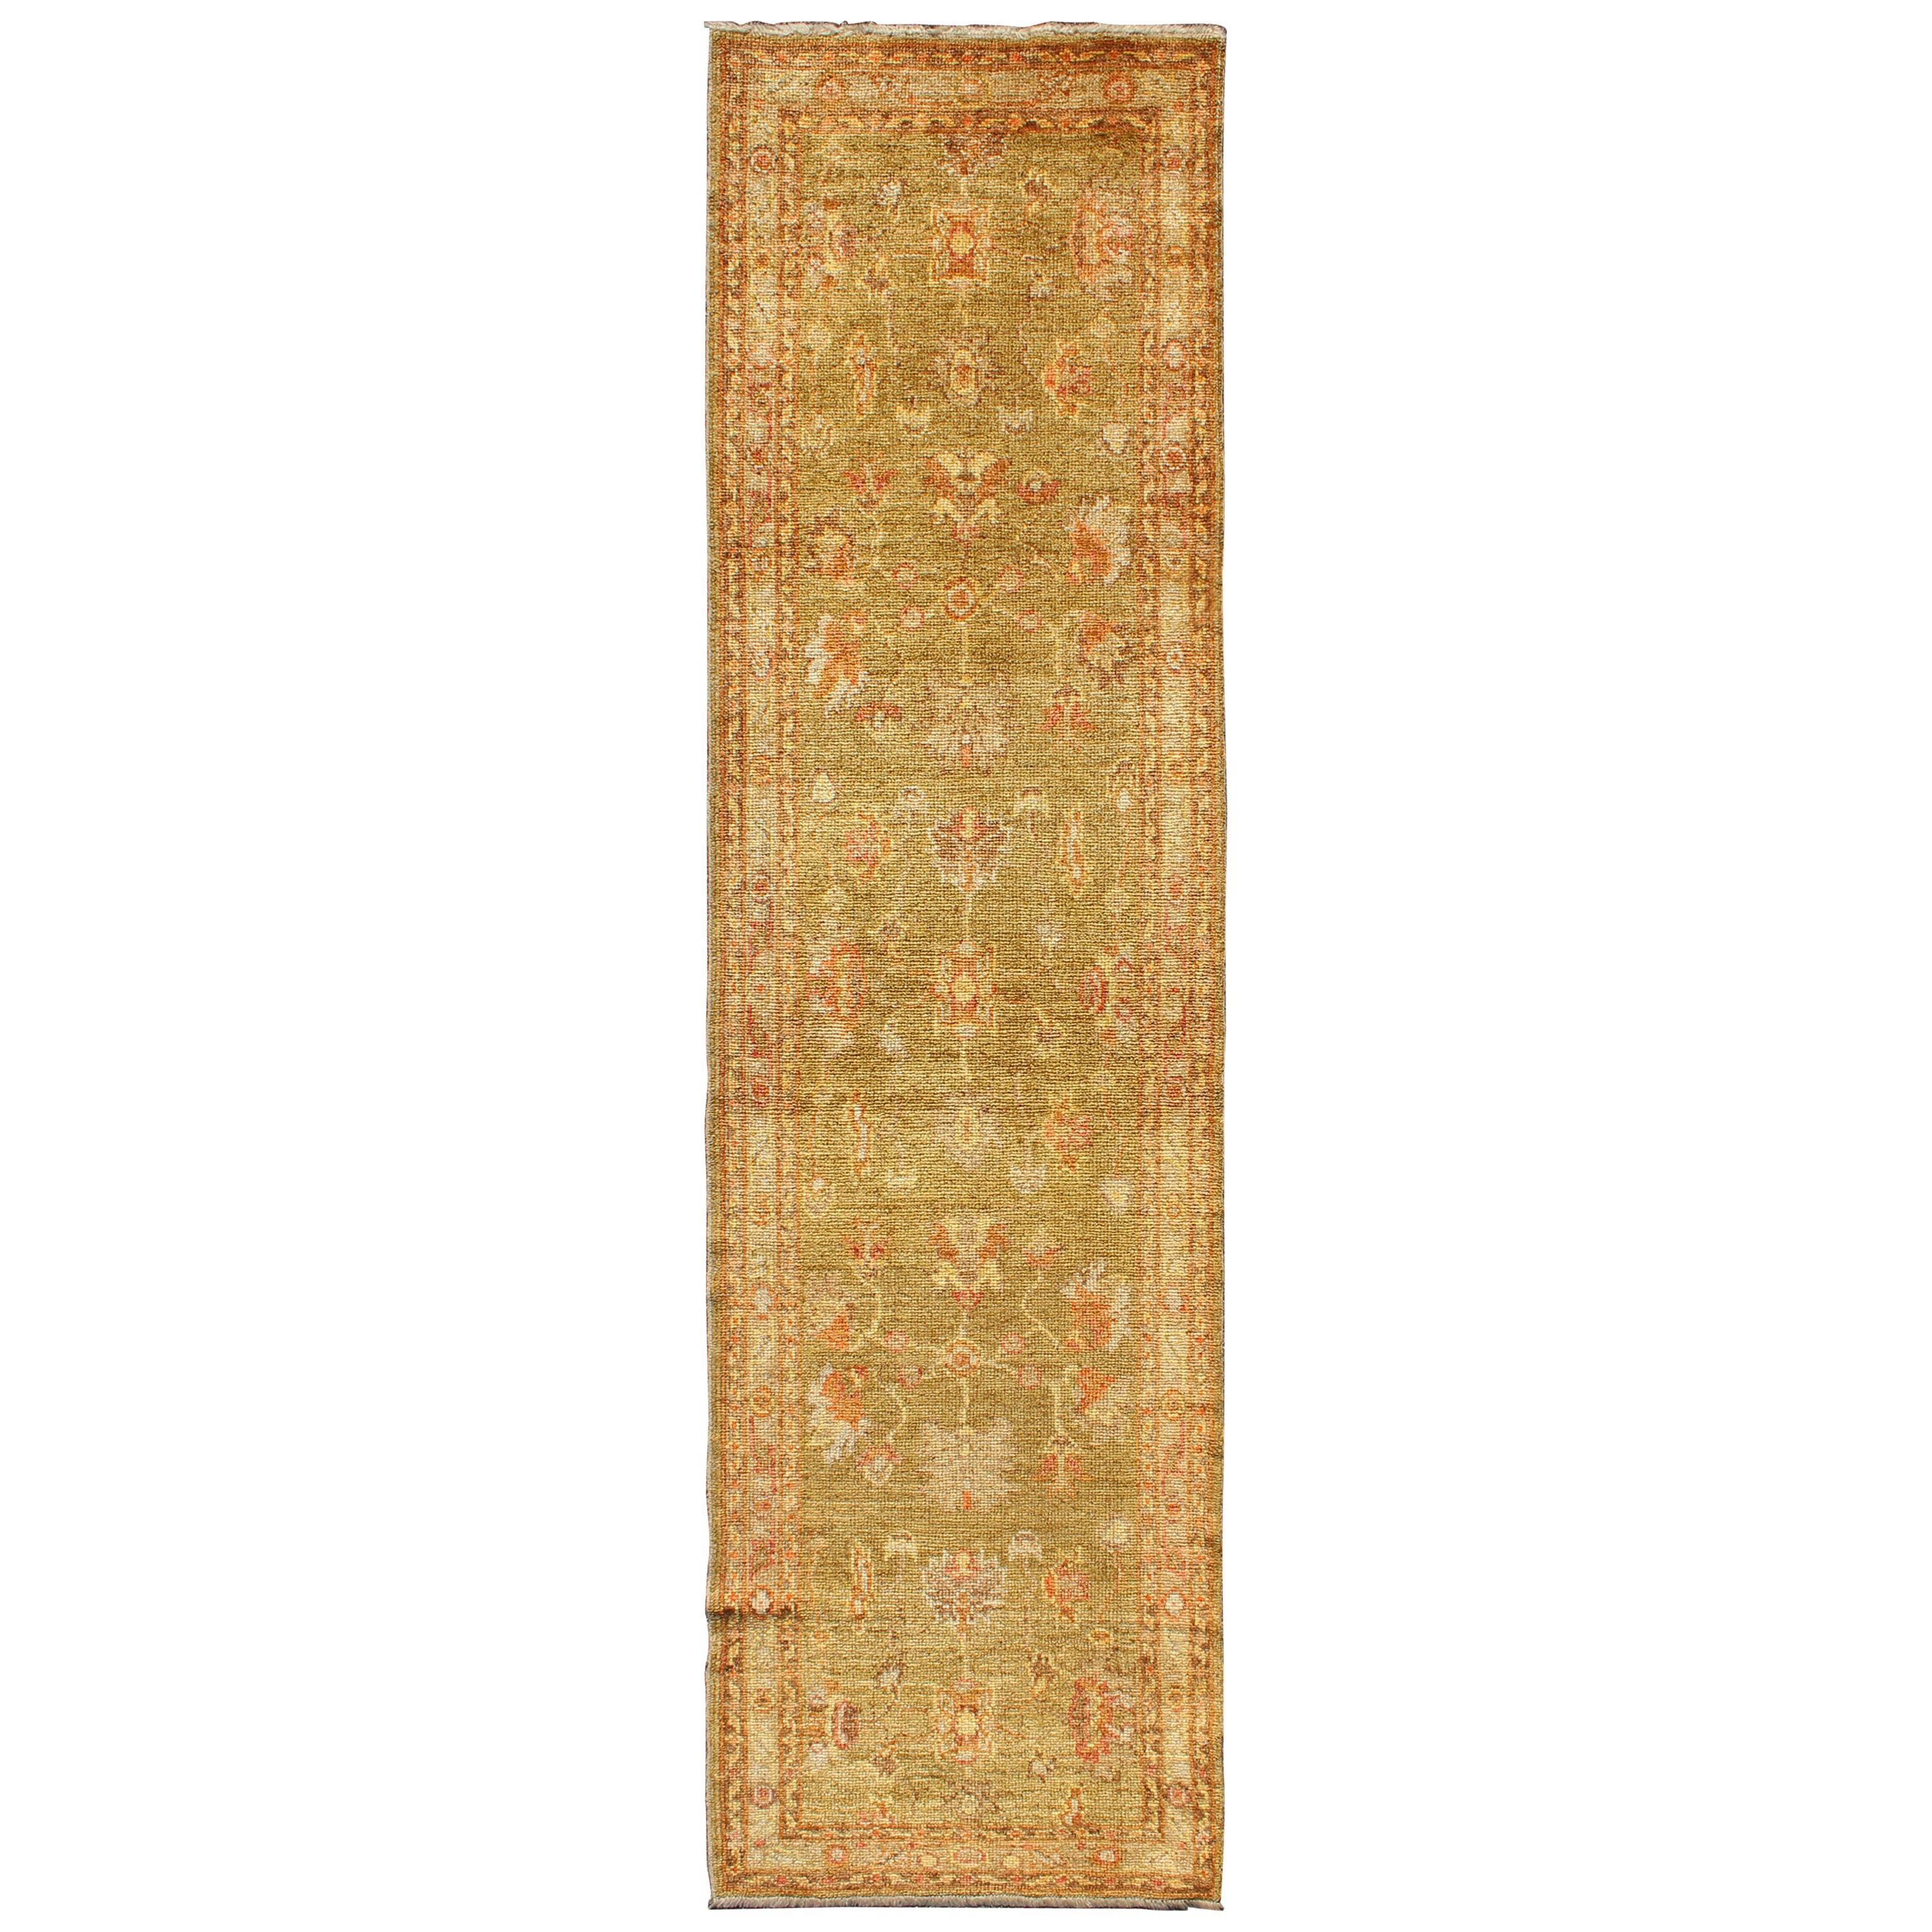 Turkish Angora Oushak Runner with Traditional All-Over Design in Yellow Green